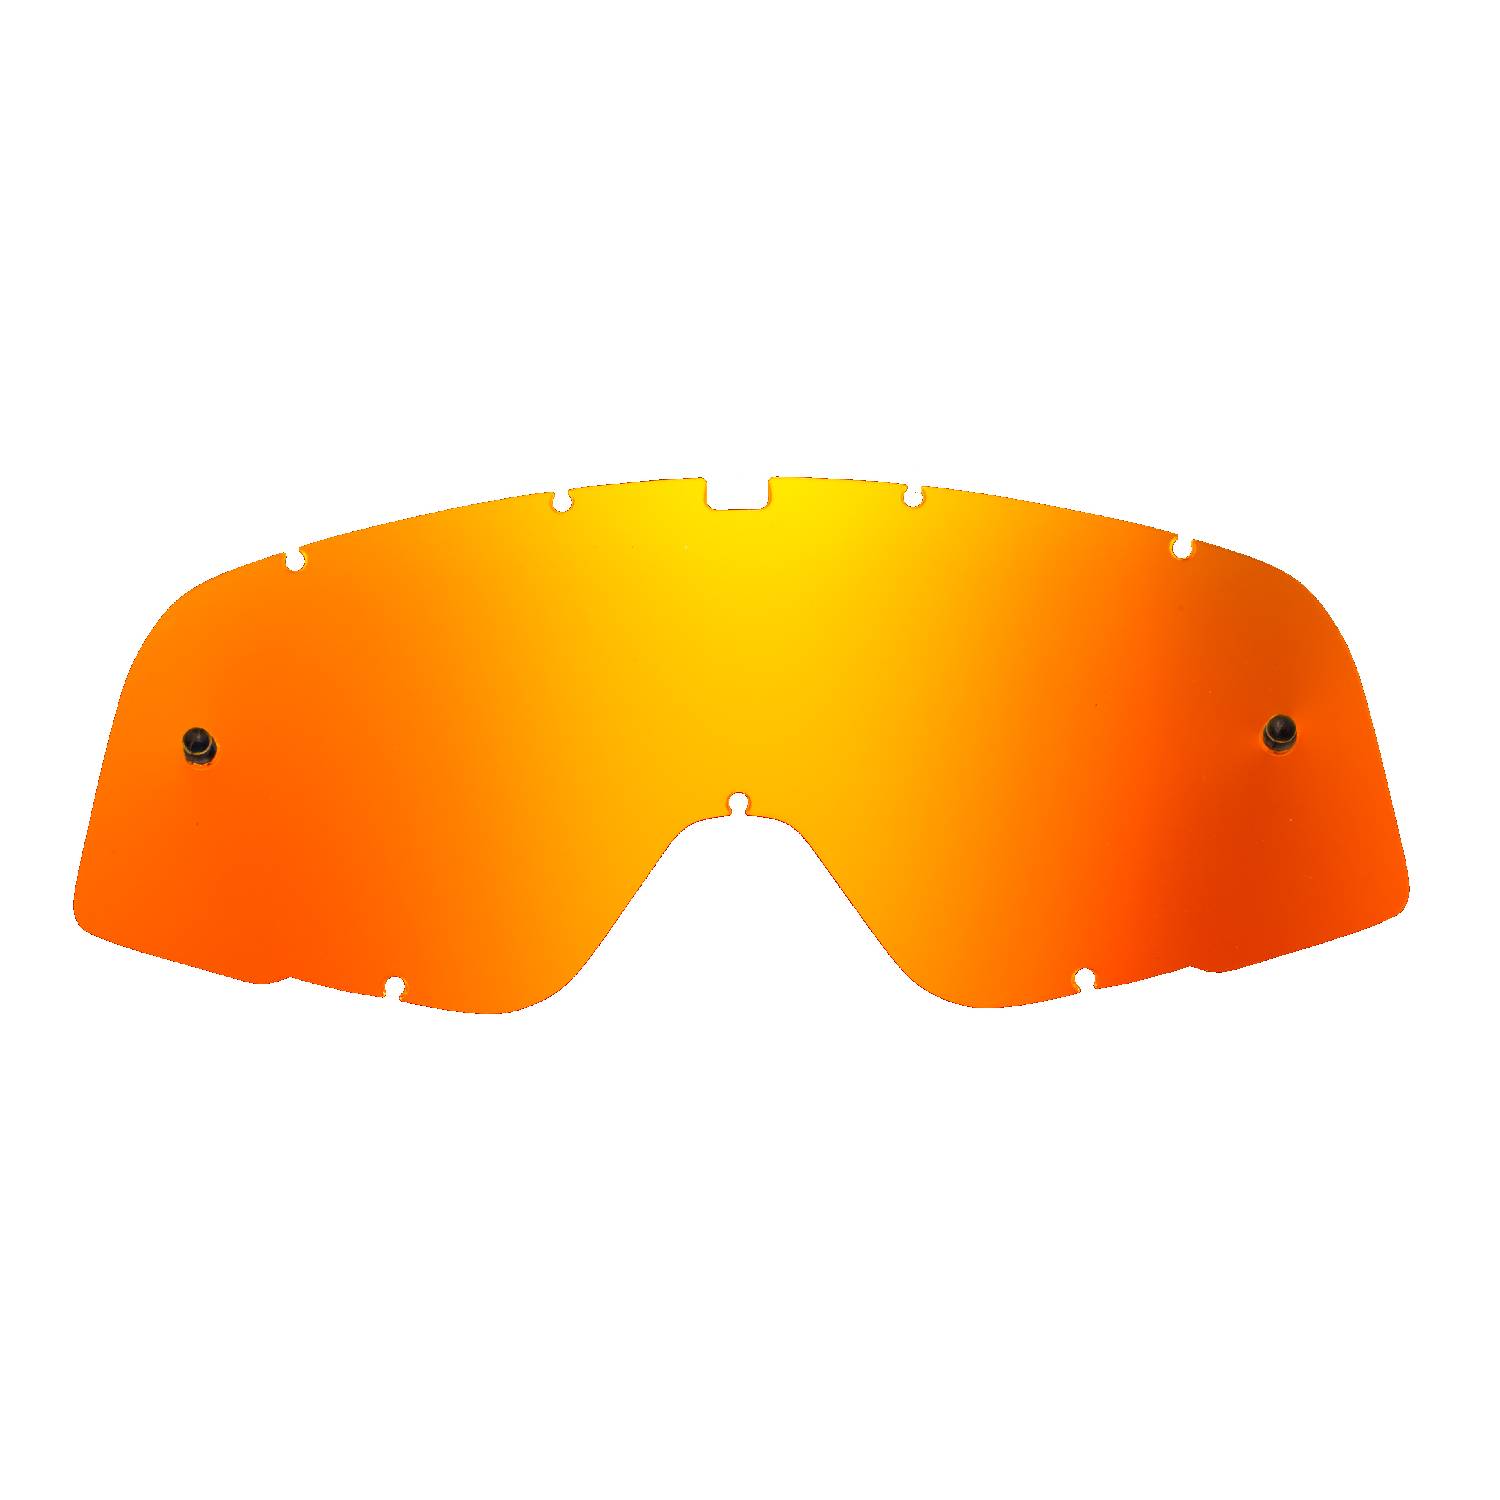 orange-toned mirrored replacement lenses for goggles compatible for 100% Barstow goggle